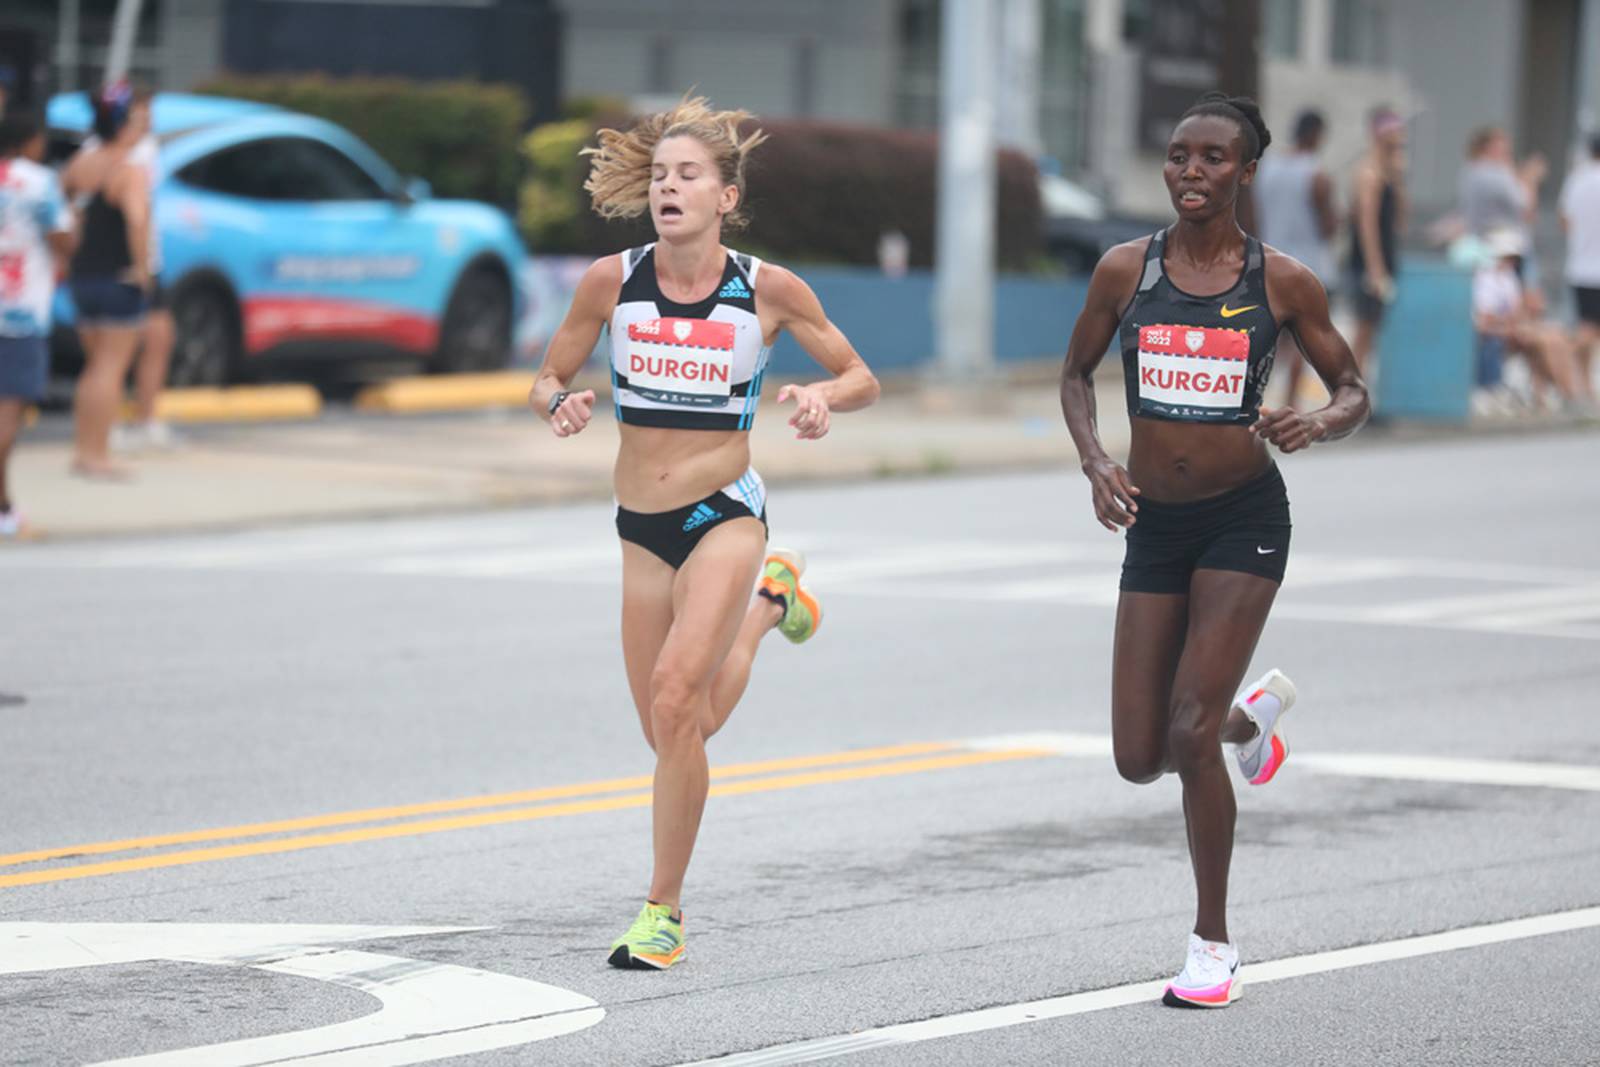 Major changes happening to annual AJC Peachtree Road race in 2023 WSB